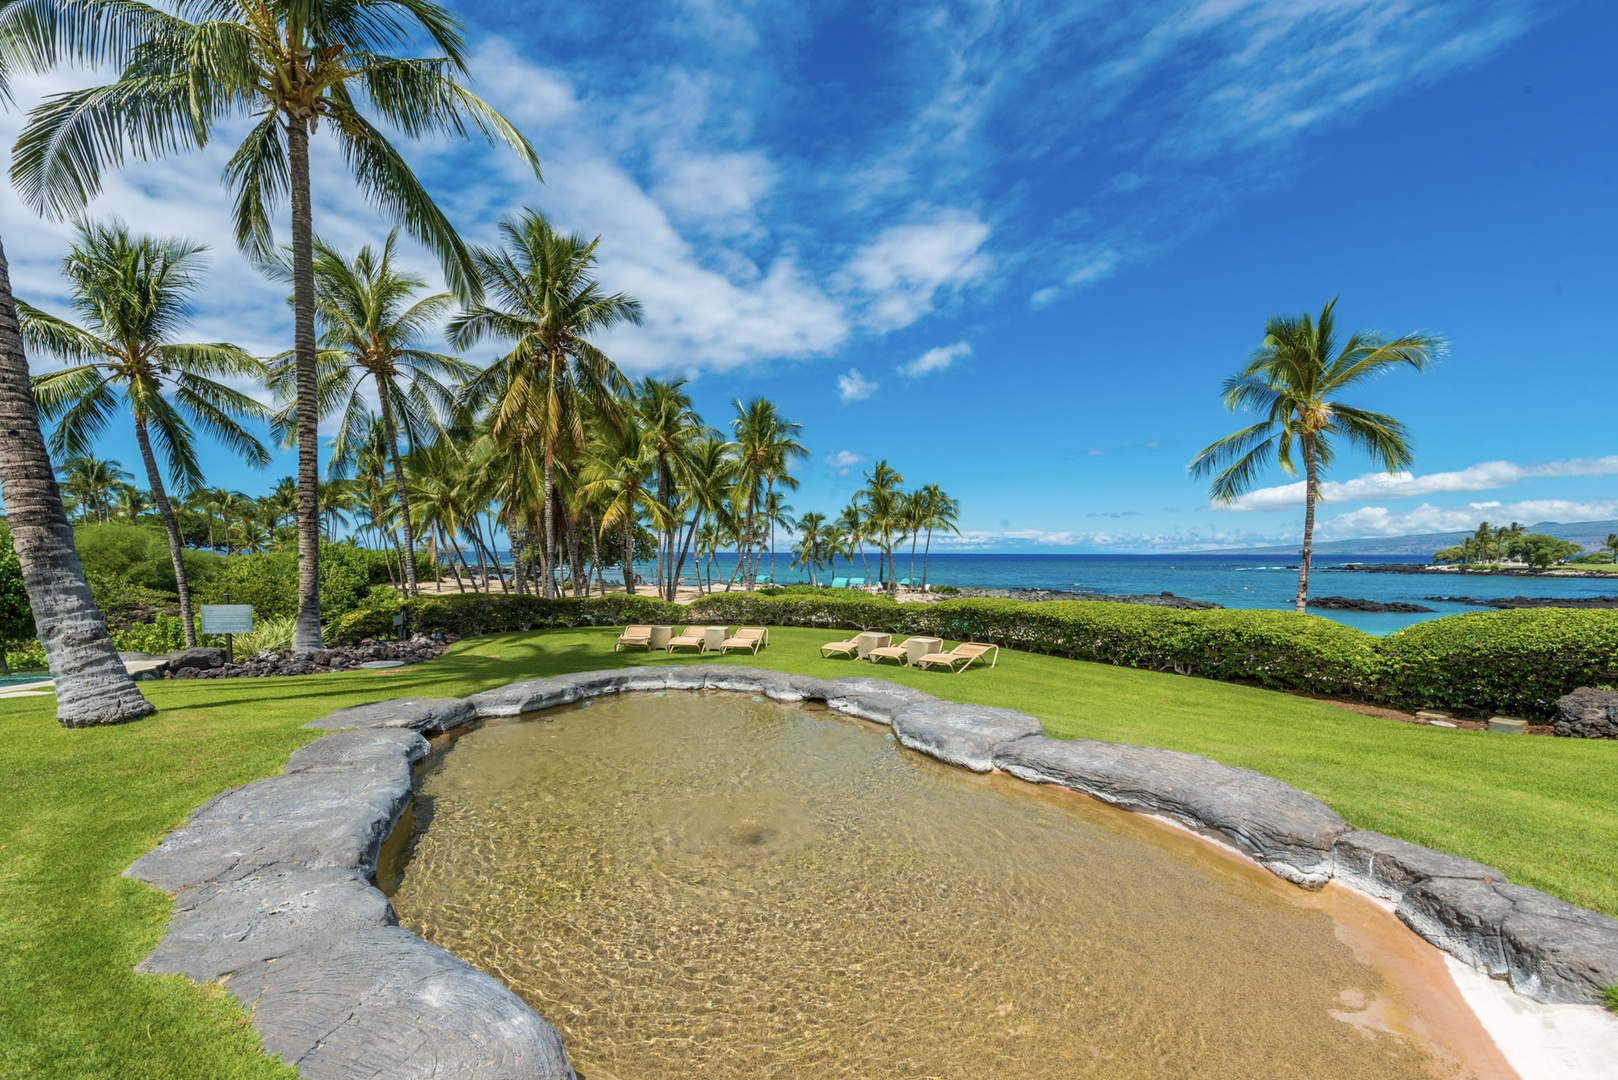 Kamuela Vacation Rentals, 3BD Na Hale 3 at Pauoa Beach Club at Mauna Lani Resort - Watch the kids play from loungers at Pauoa Beach Club's scenic sand bottom pool